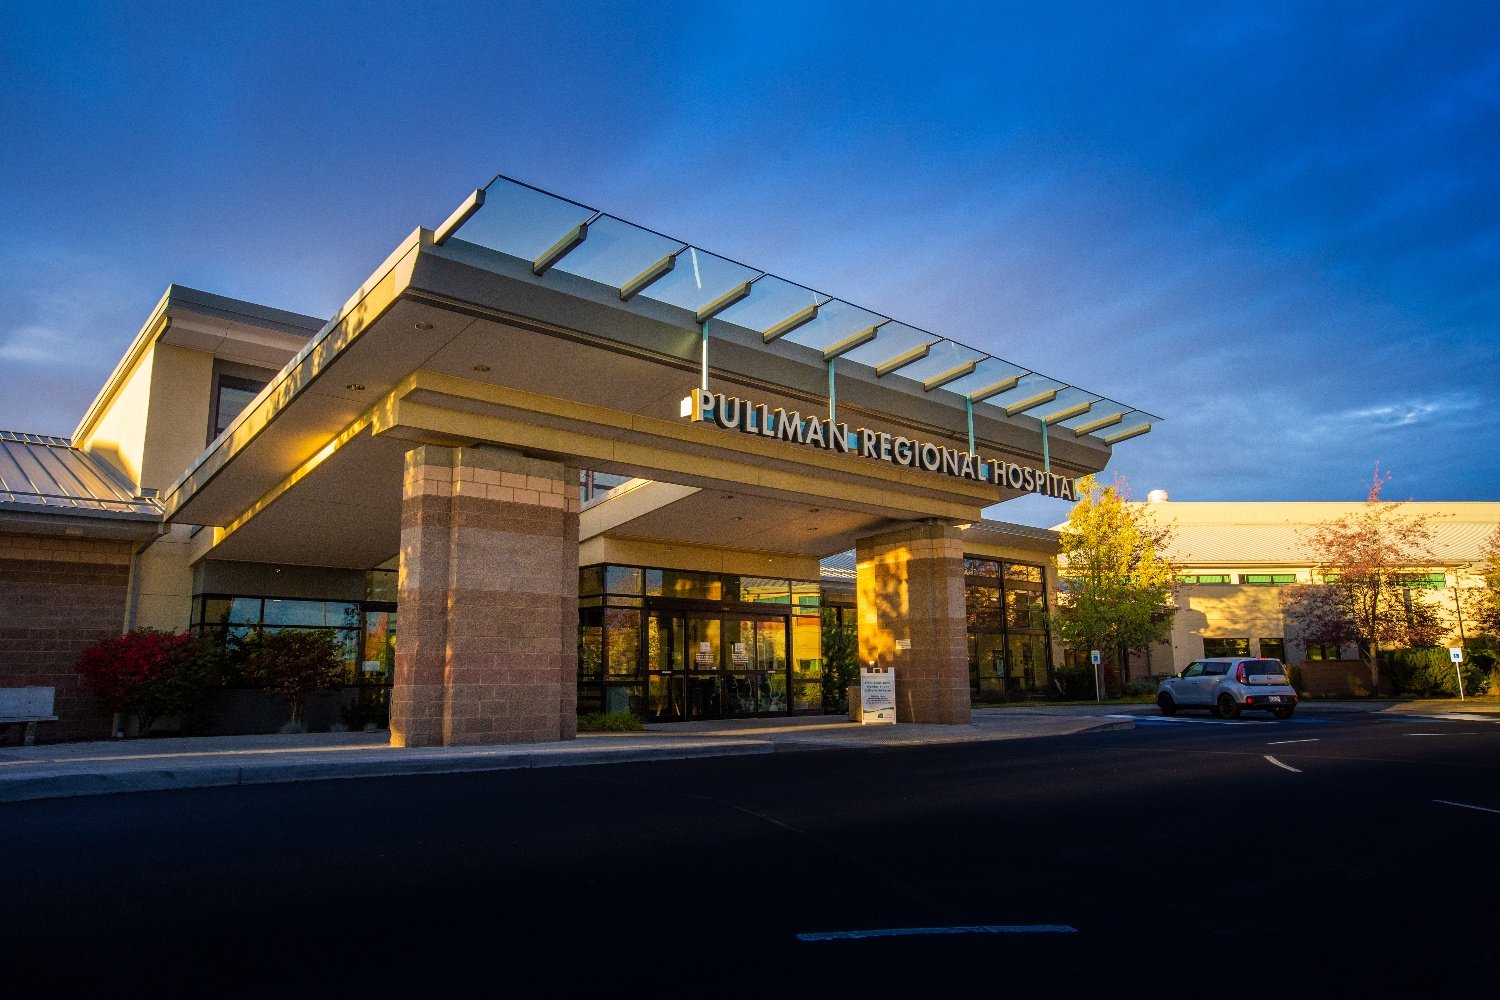 Pullman Regional Hospital Refreshed Brand Builds on a Simplified Patient Experience